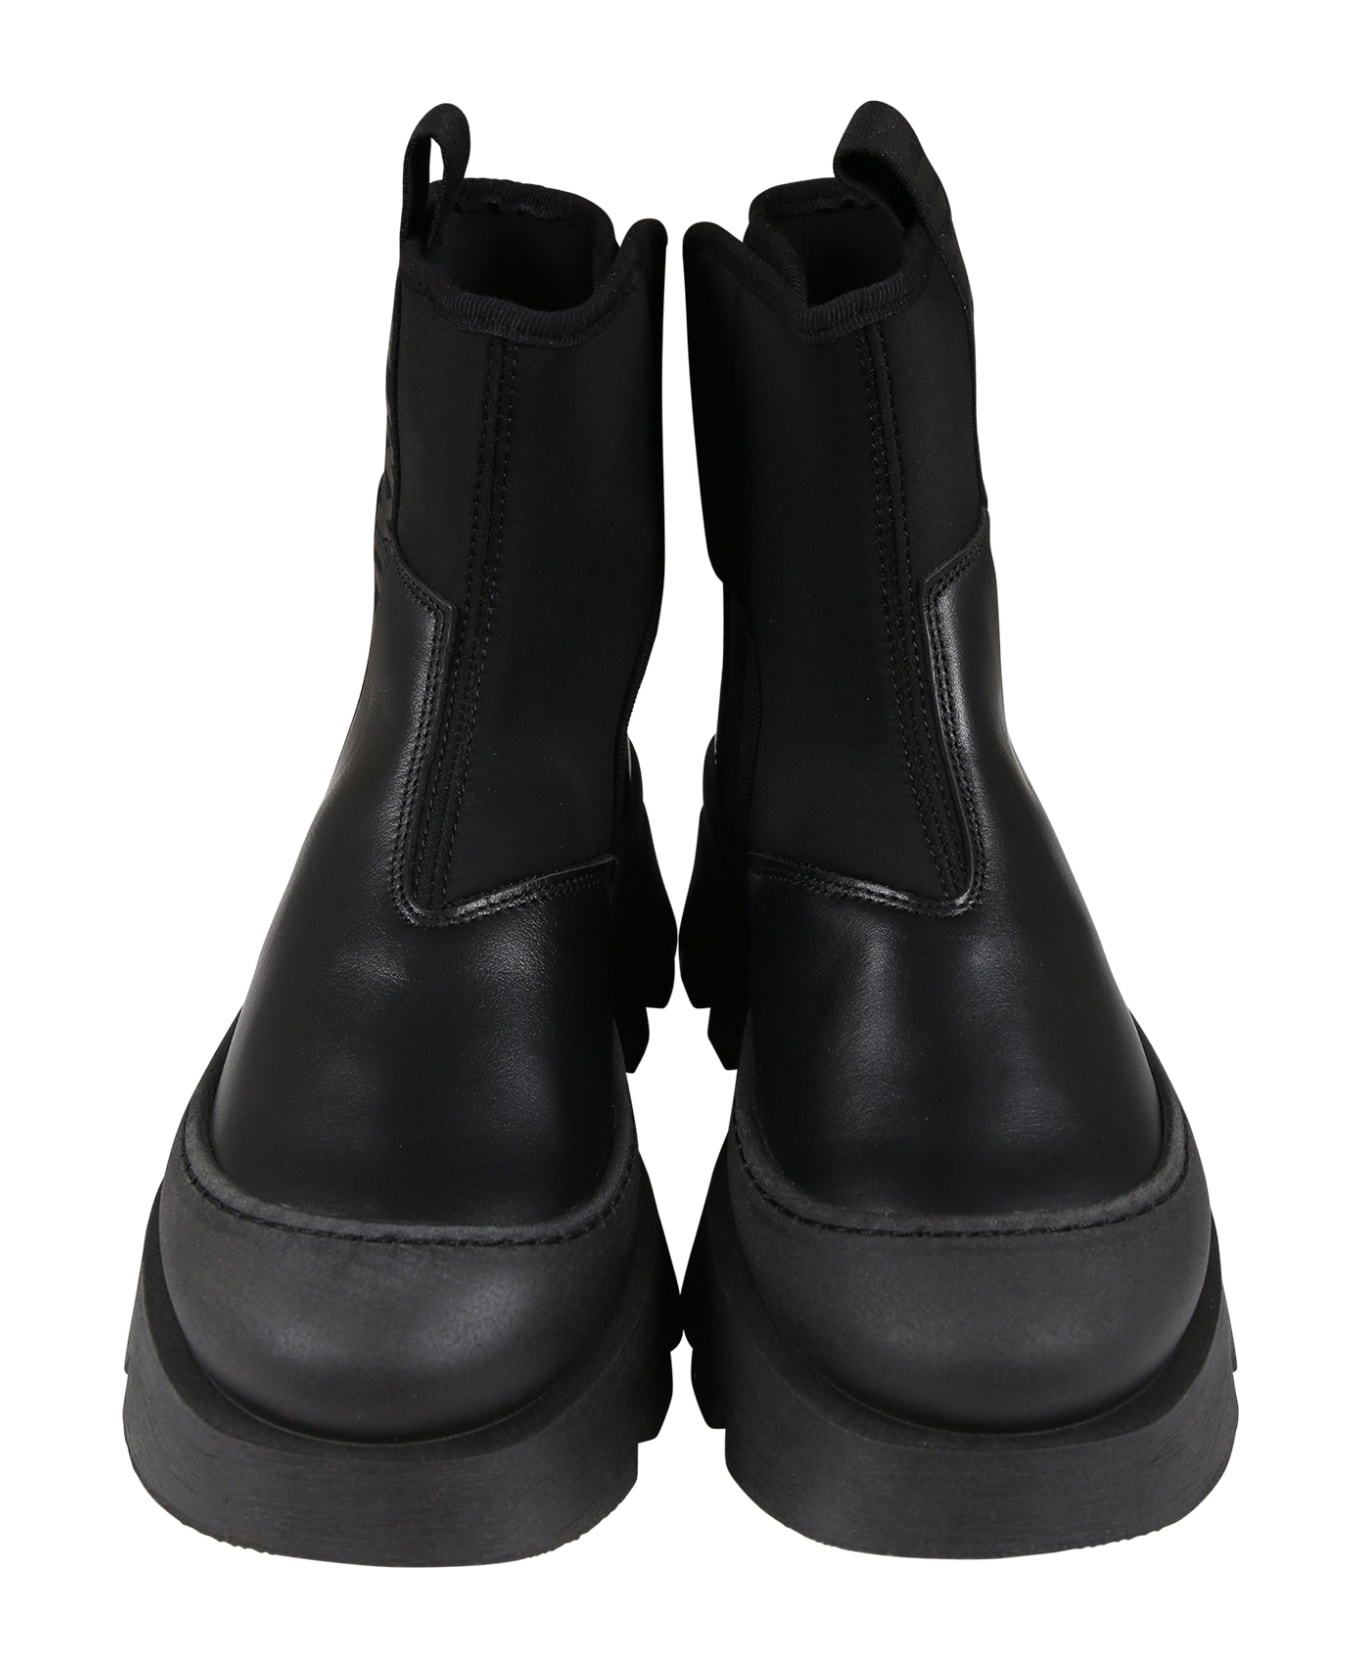 DKNY Black Ankle Boots For Girl With Logo - Black シューズ